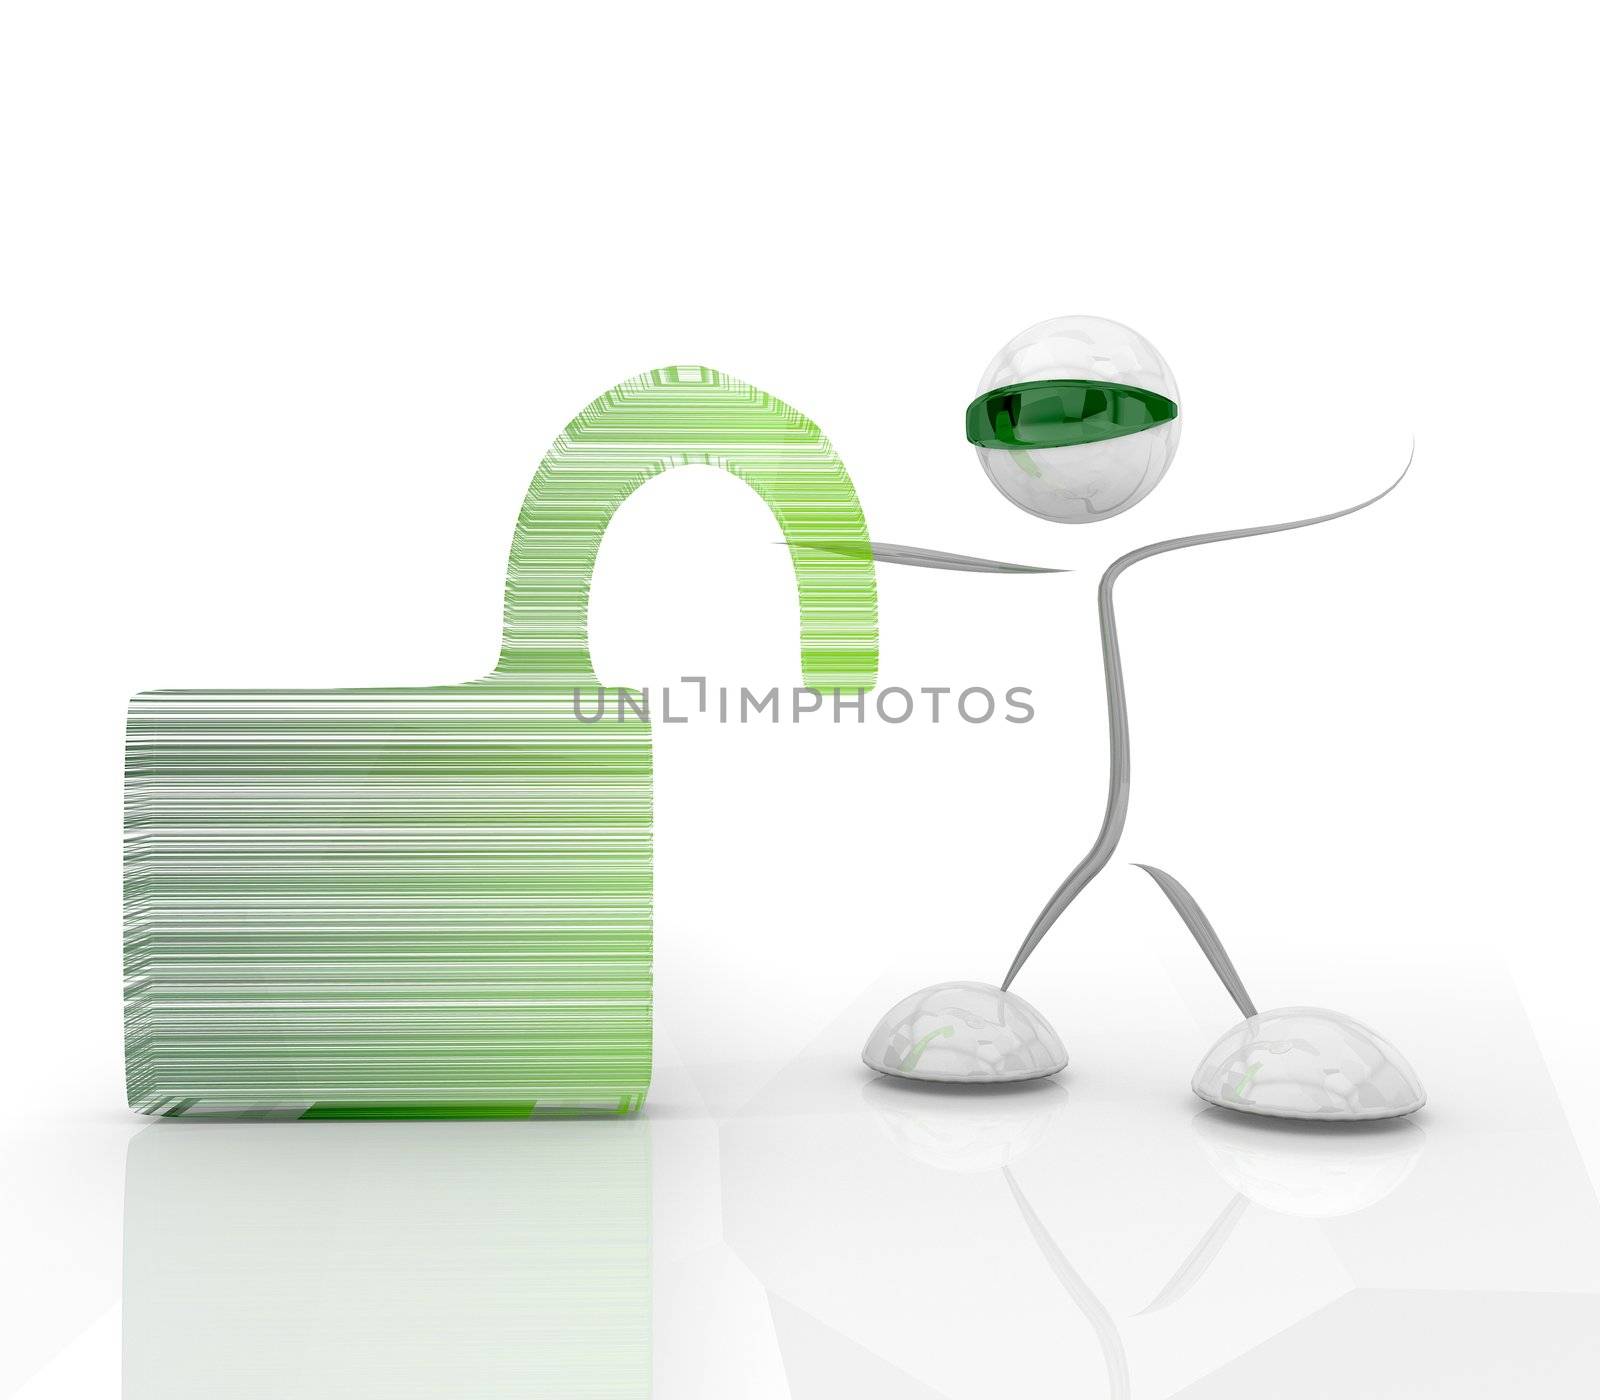 Unlock icon with a futuristic character on a white background by onirb